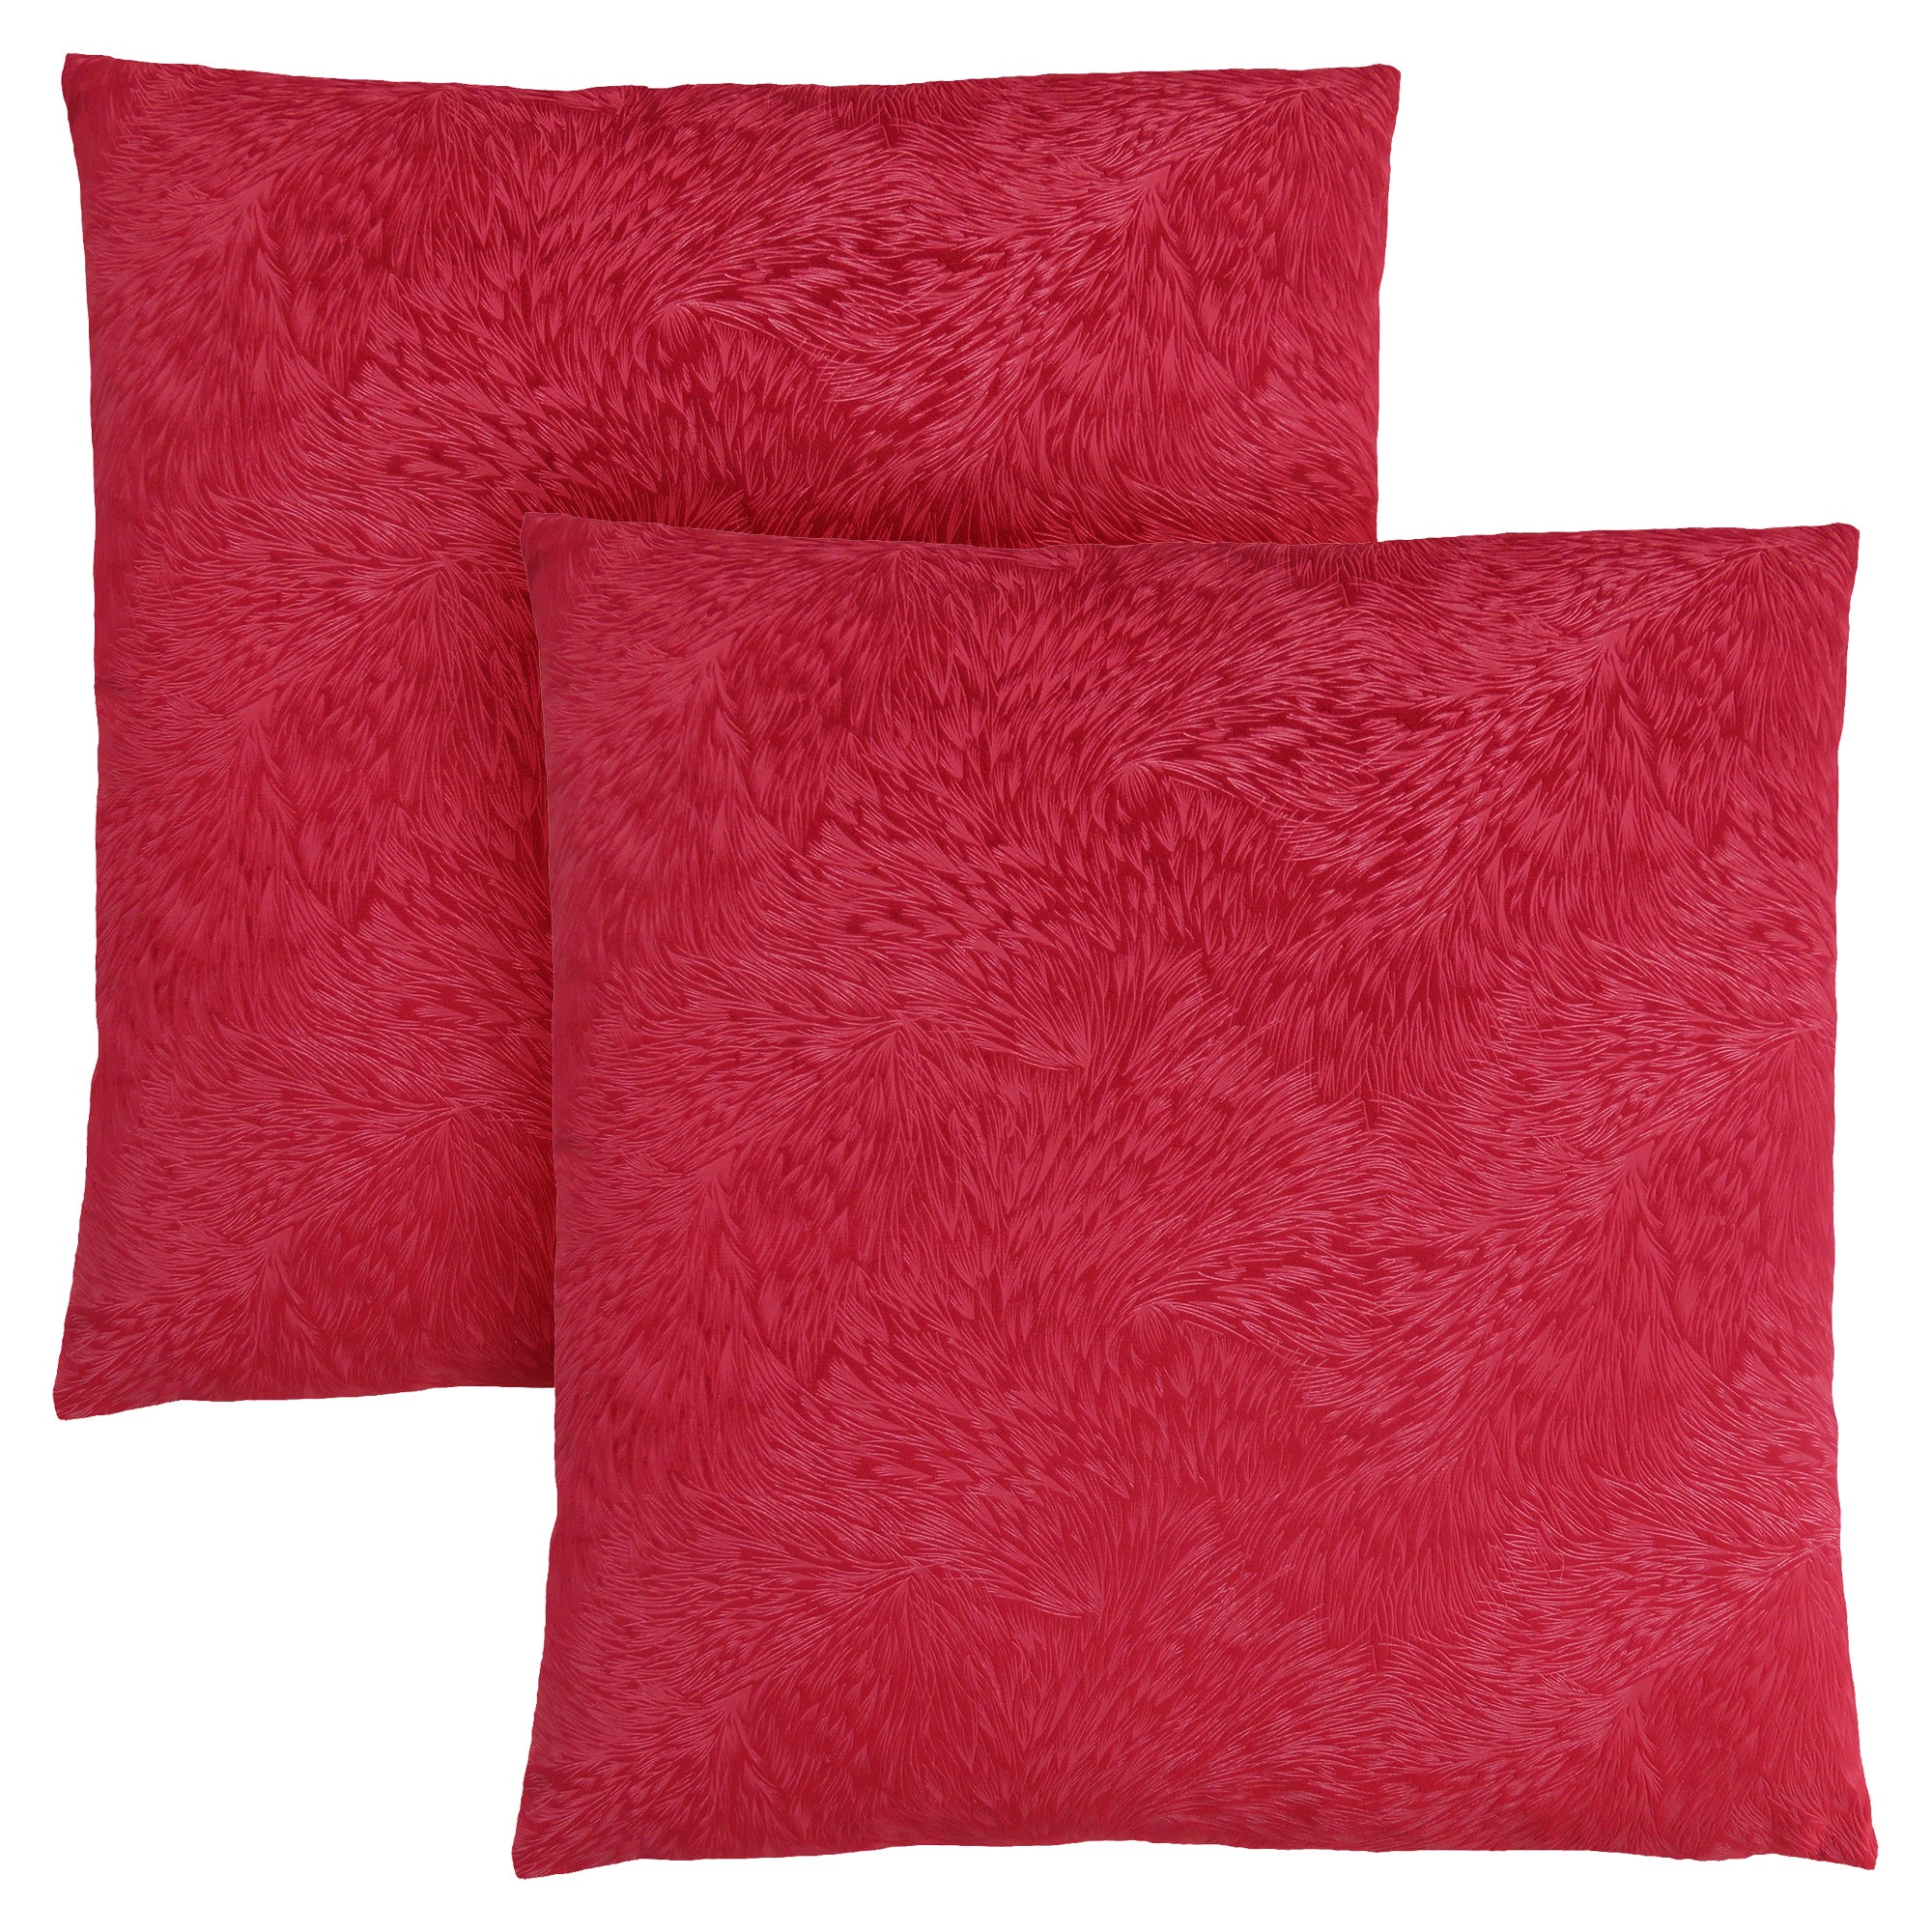 Pillow - 18X 18 / Red Feathered Velvet / 2Pcs